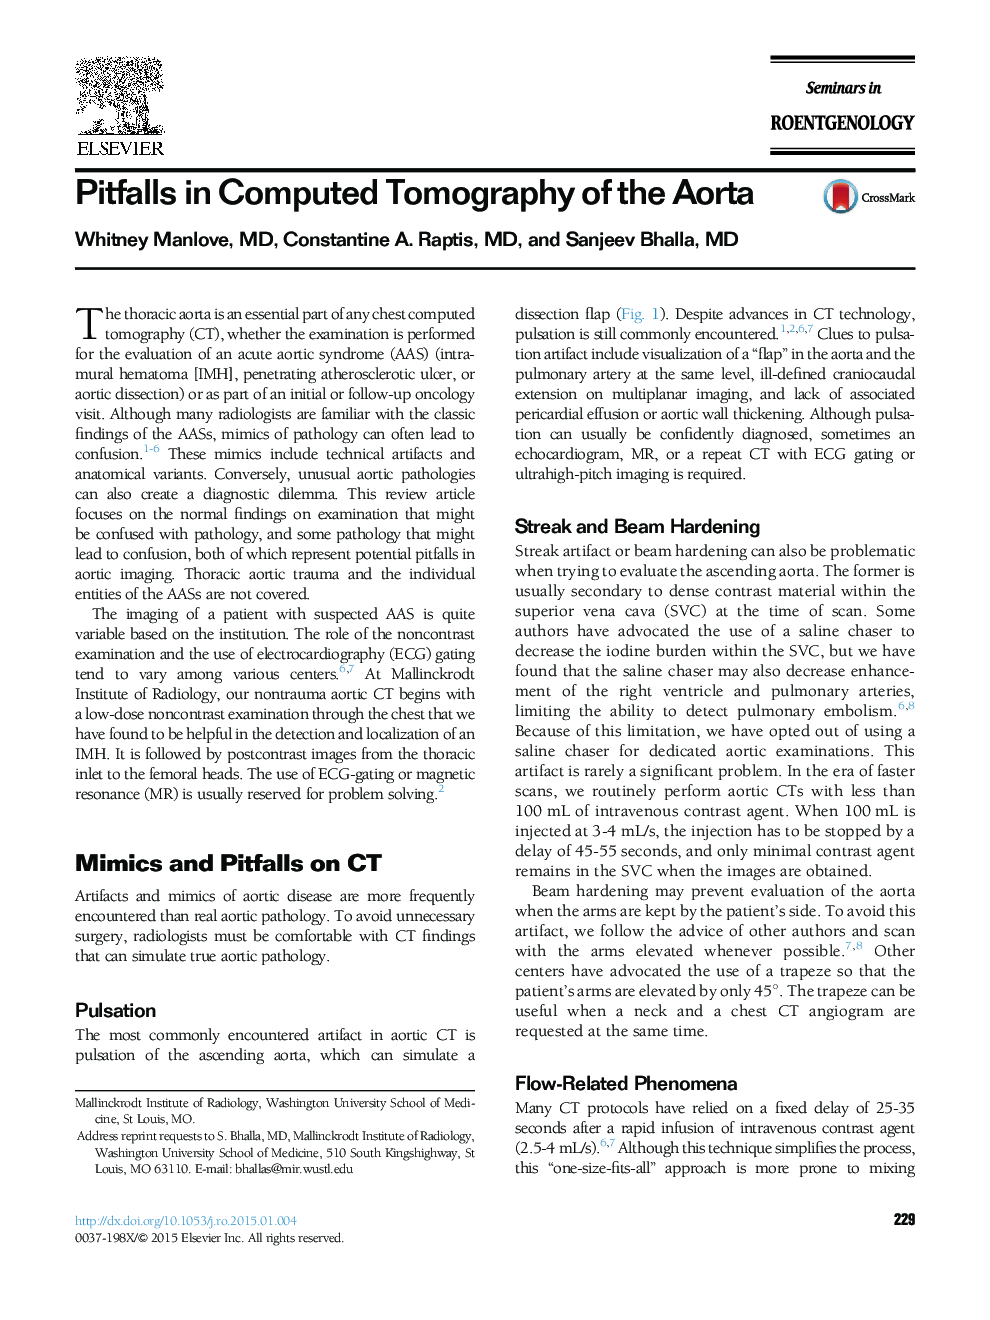 Pitfalls in Computed Tomography of the Aorta